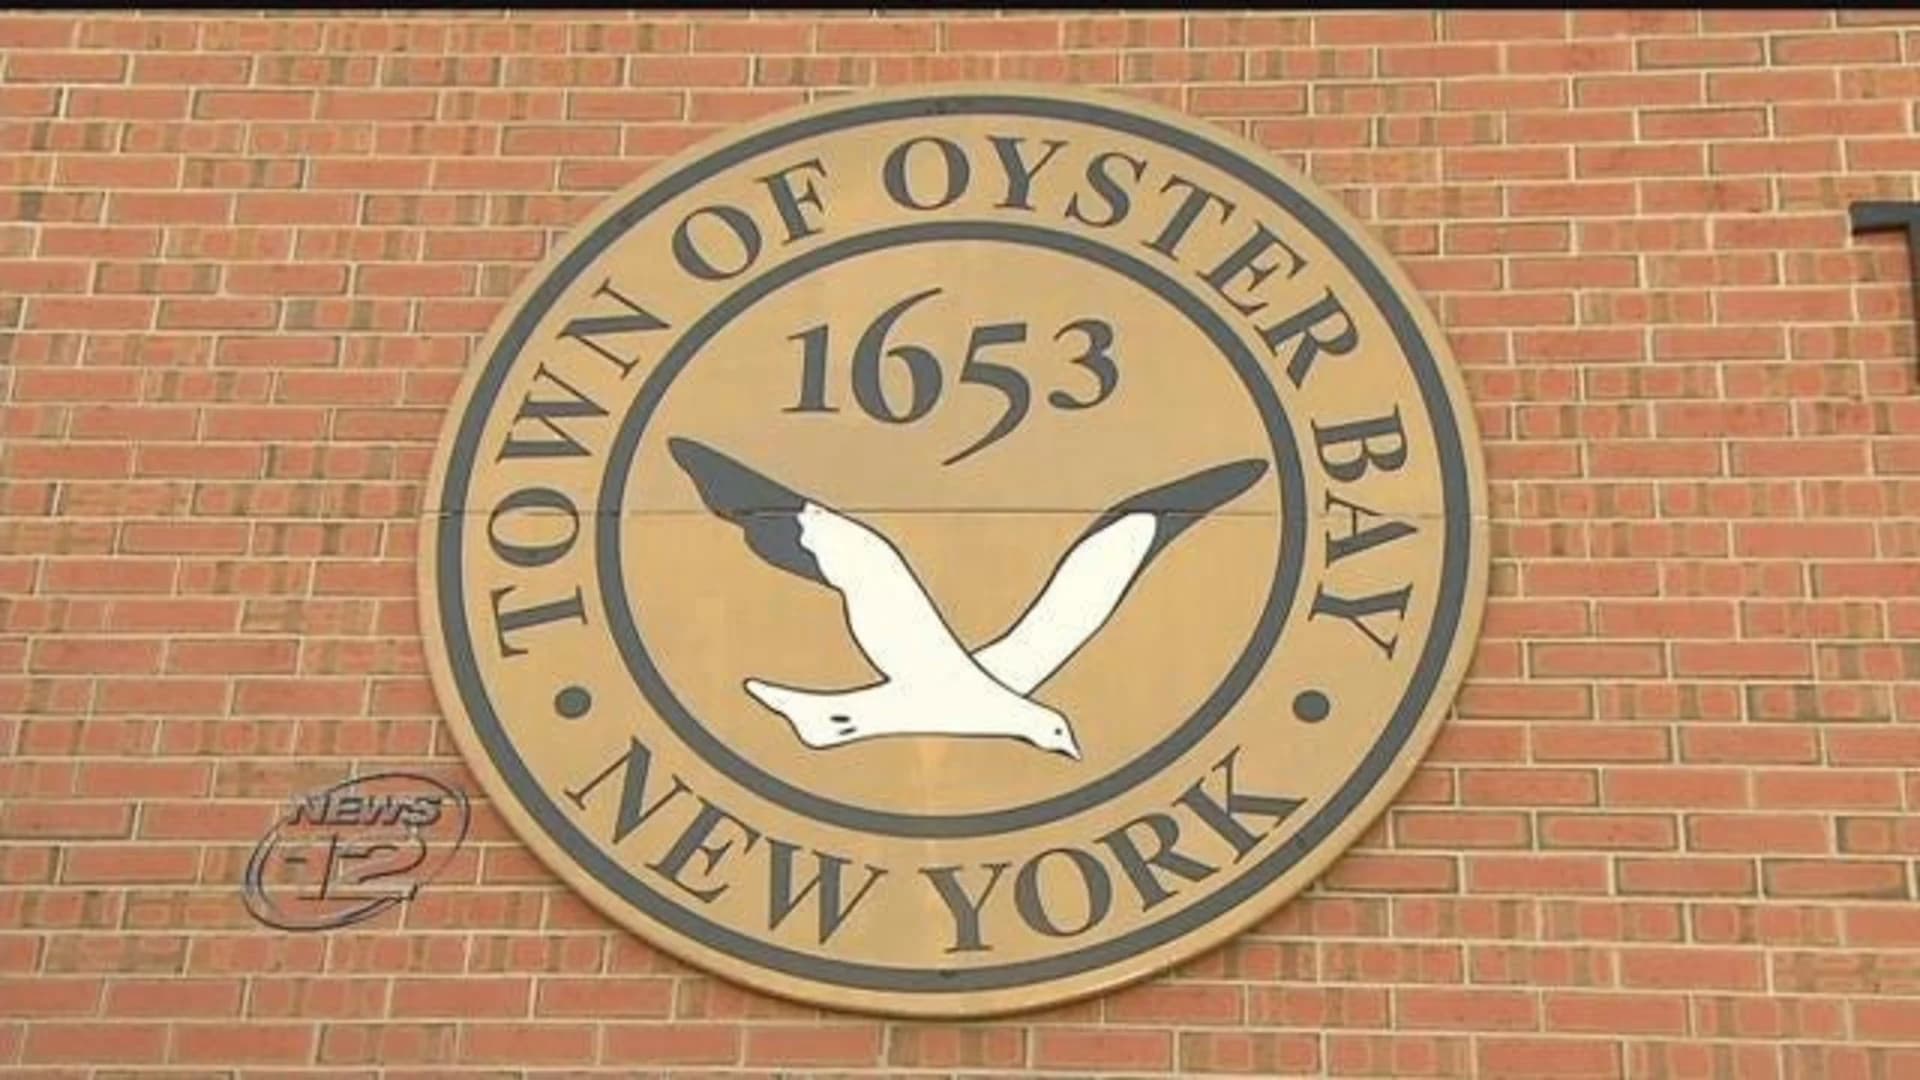 5 candidates crowd Oyster Bay Town Supervisor race